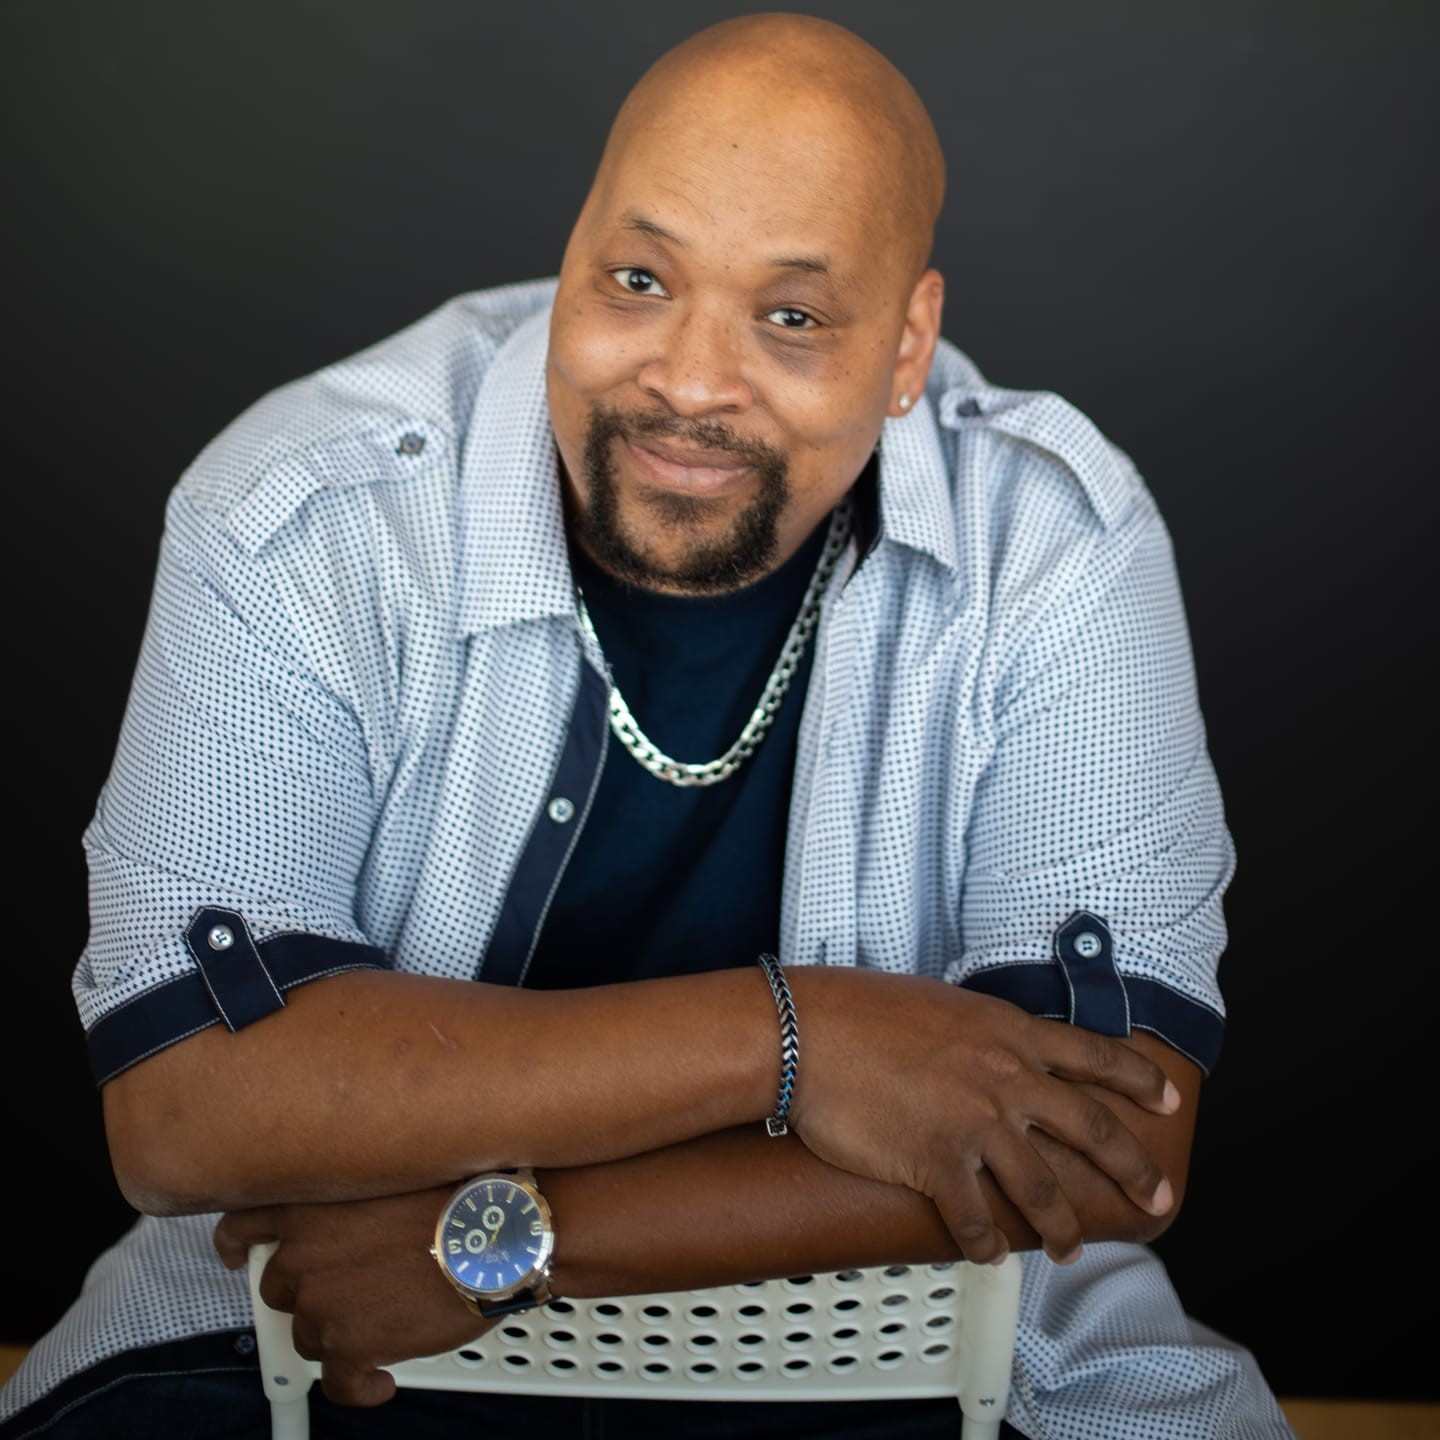 Milton Wyley Sat. 7:30 Show Funny Stop Comedy Club on May 27, 19:30@Funny Stop Comedy Club - Buy tickets and Get information on Funny Stop funnystop.online